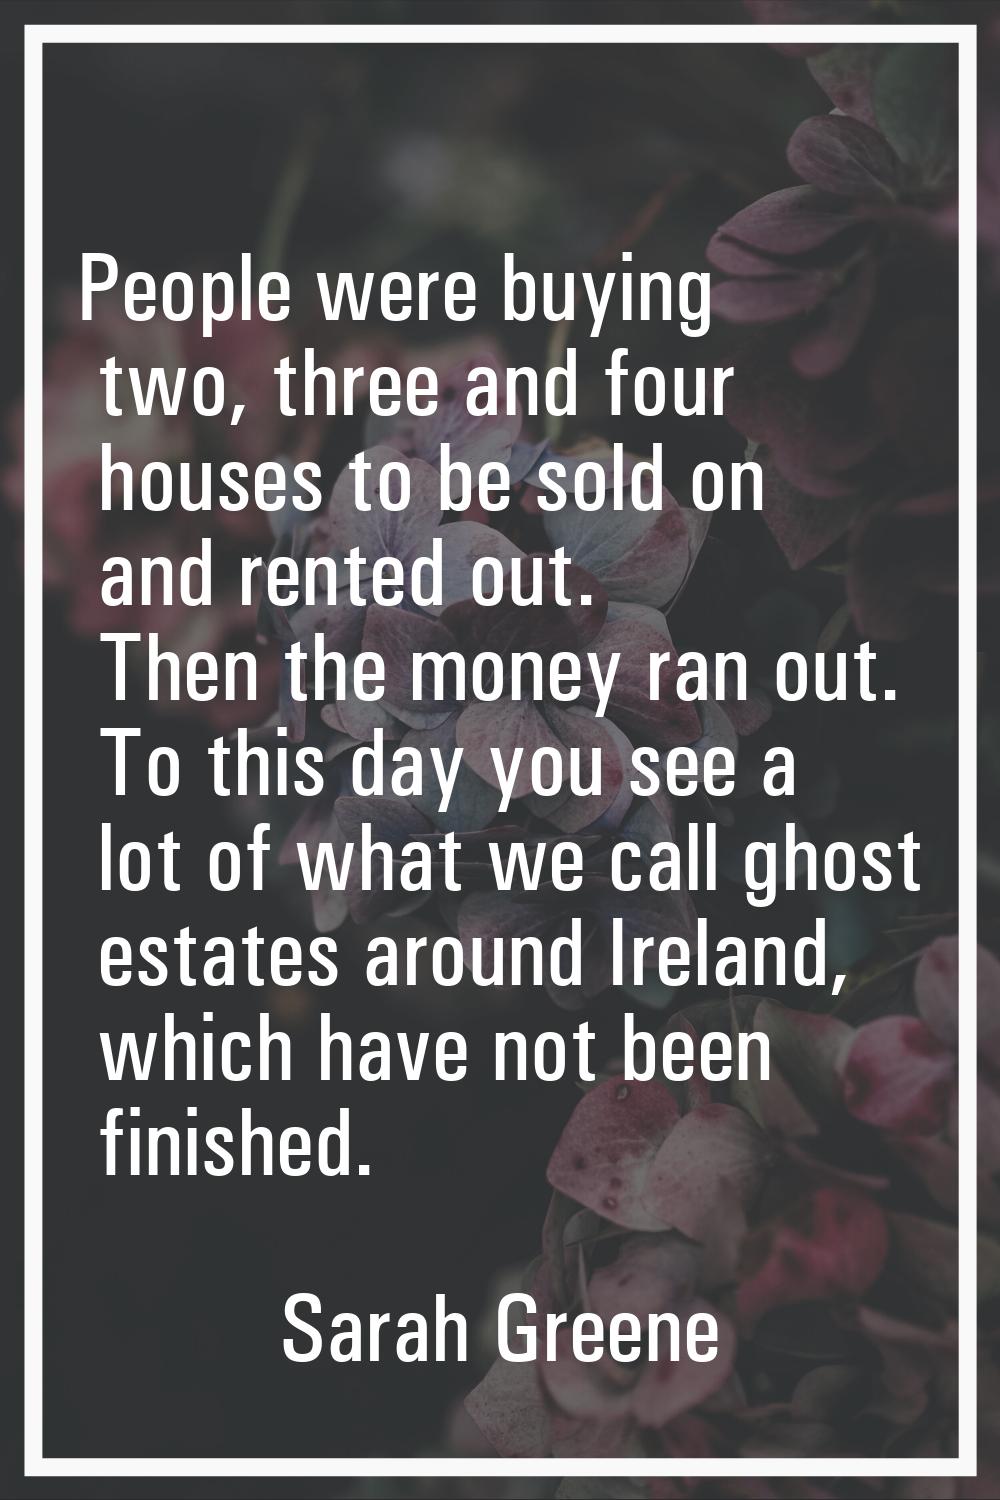 People were buying two, three and four houses to be sold on and rented out. Then the money ran out.